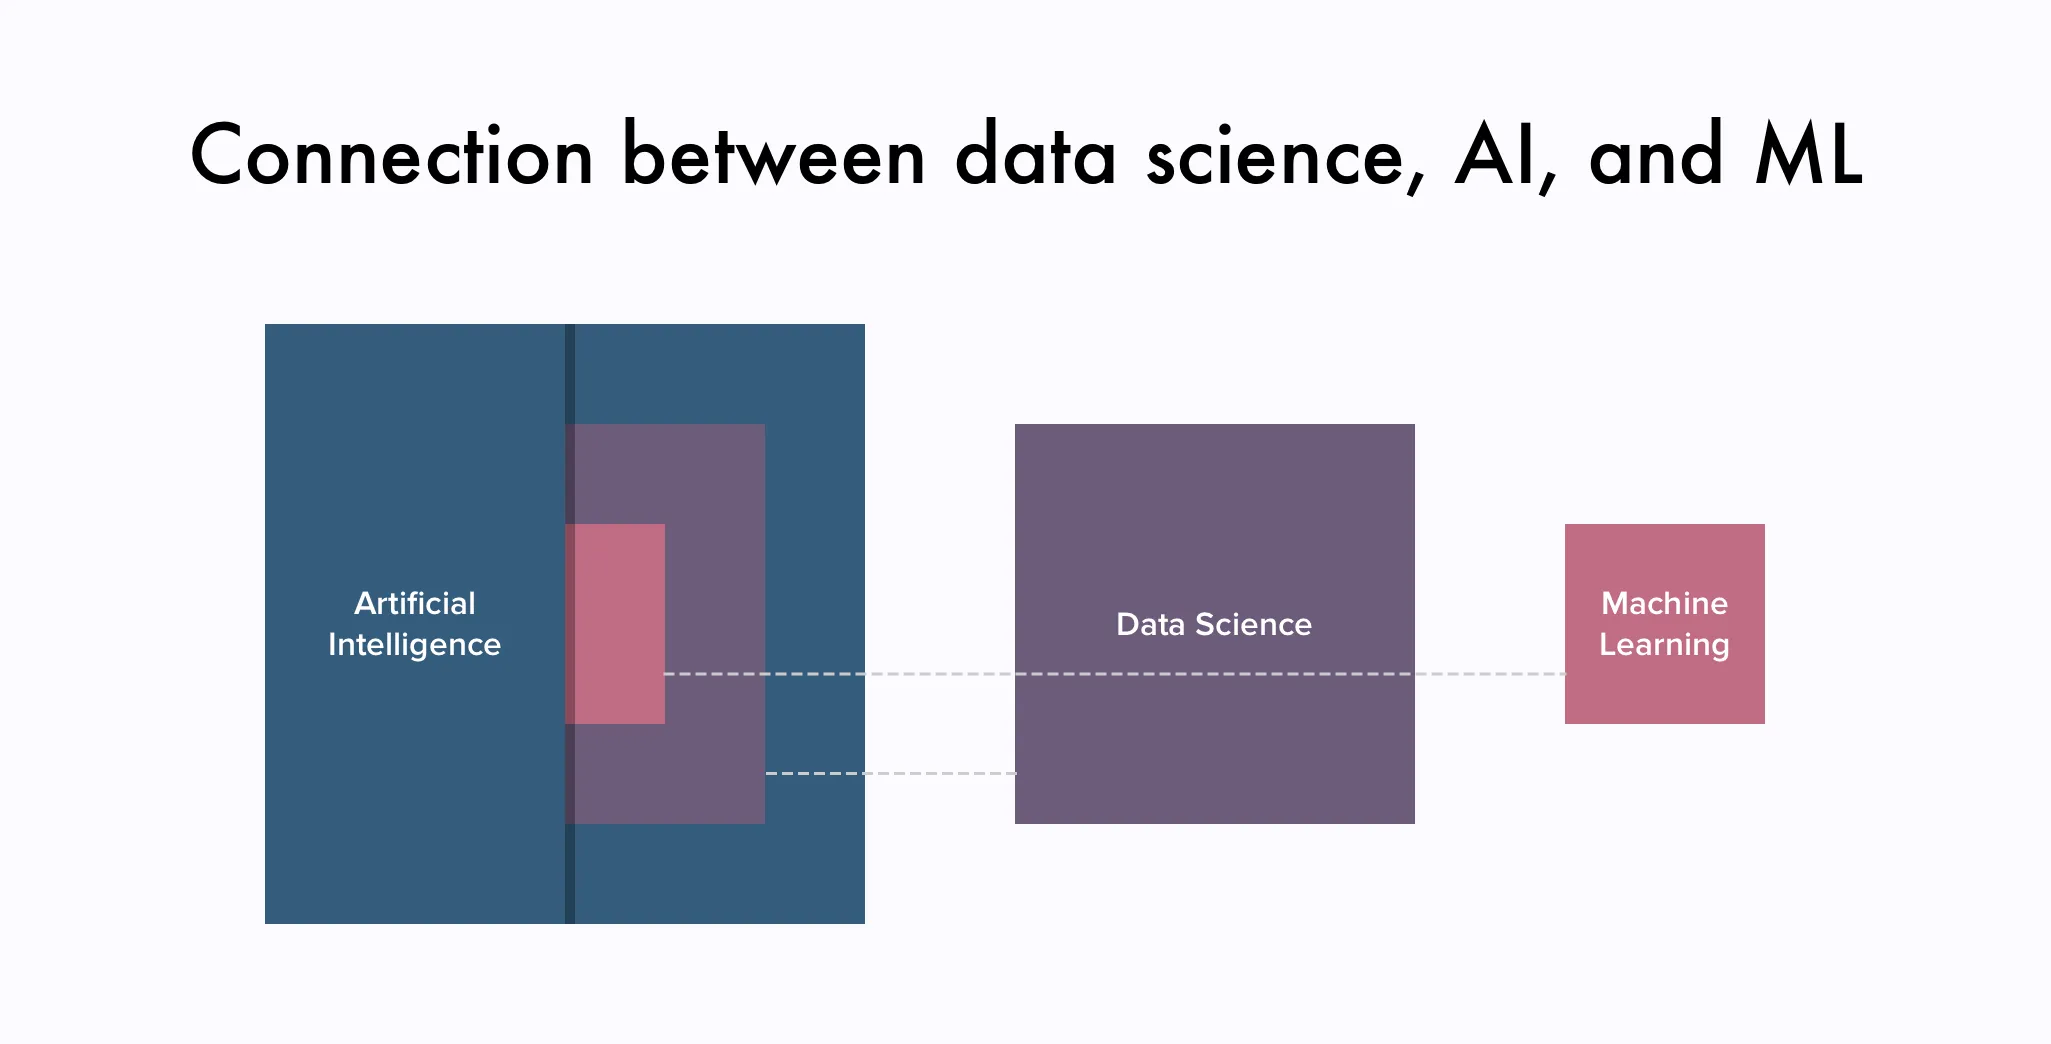 Connection between data science, AI, and ML